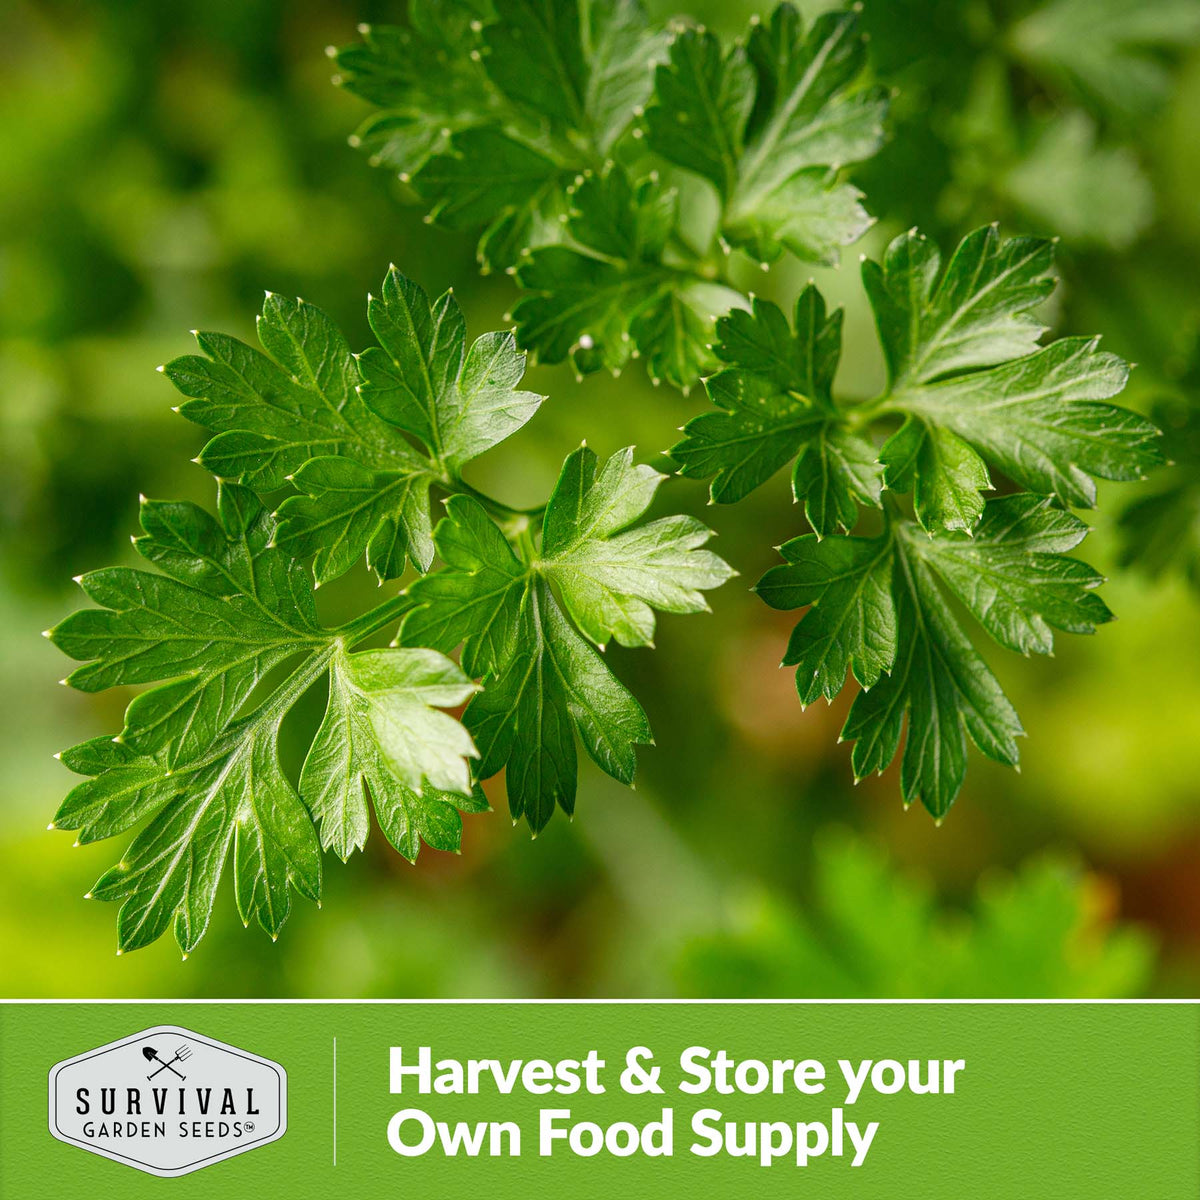 Harvest and store your own food supply